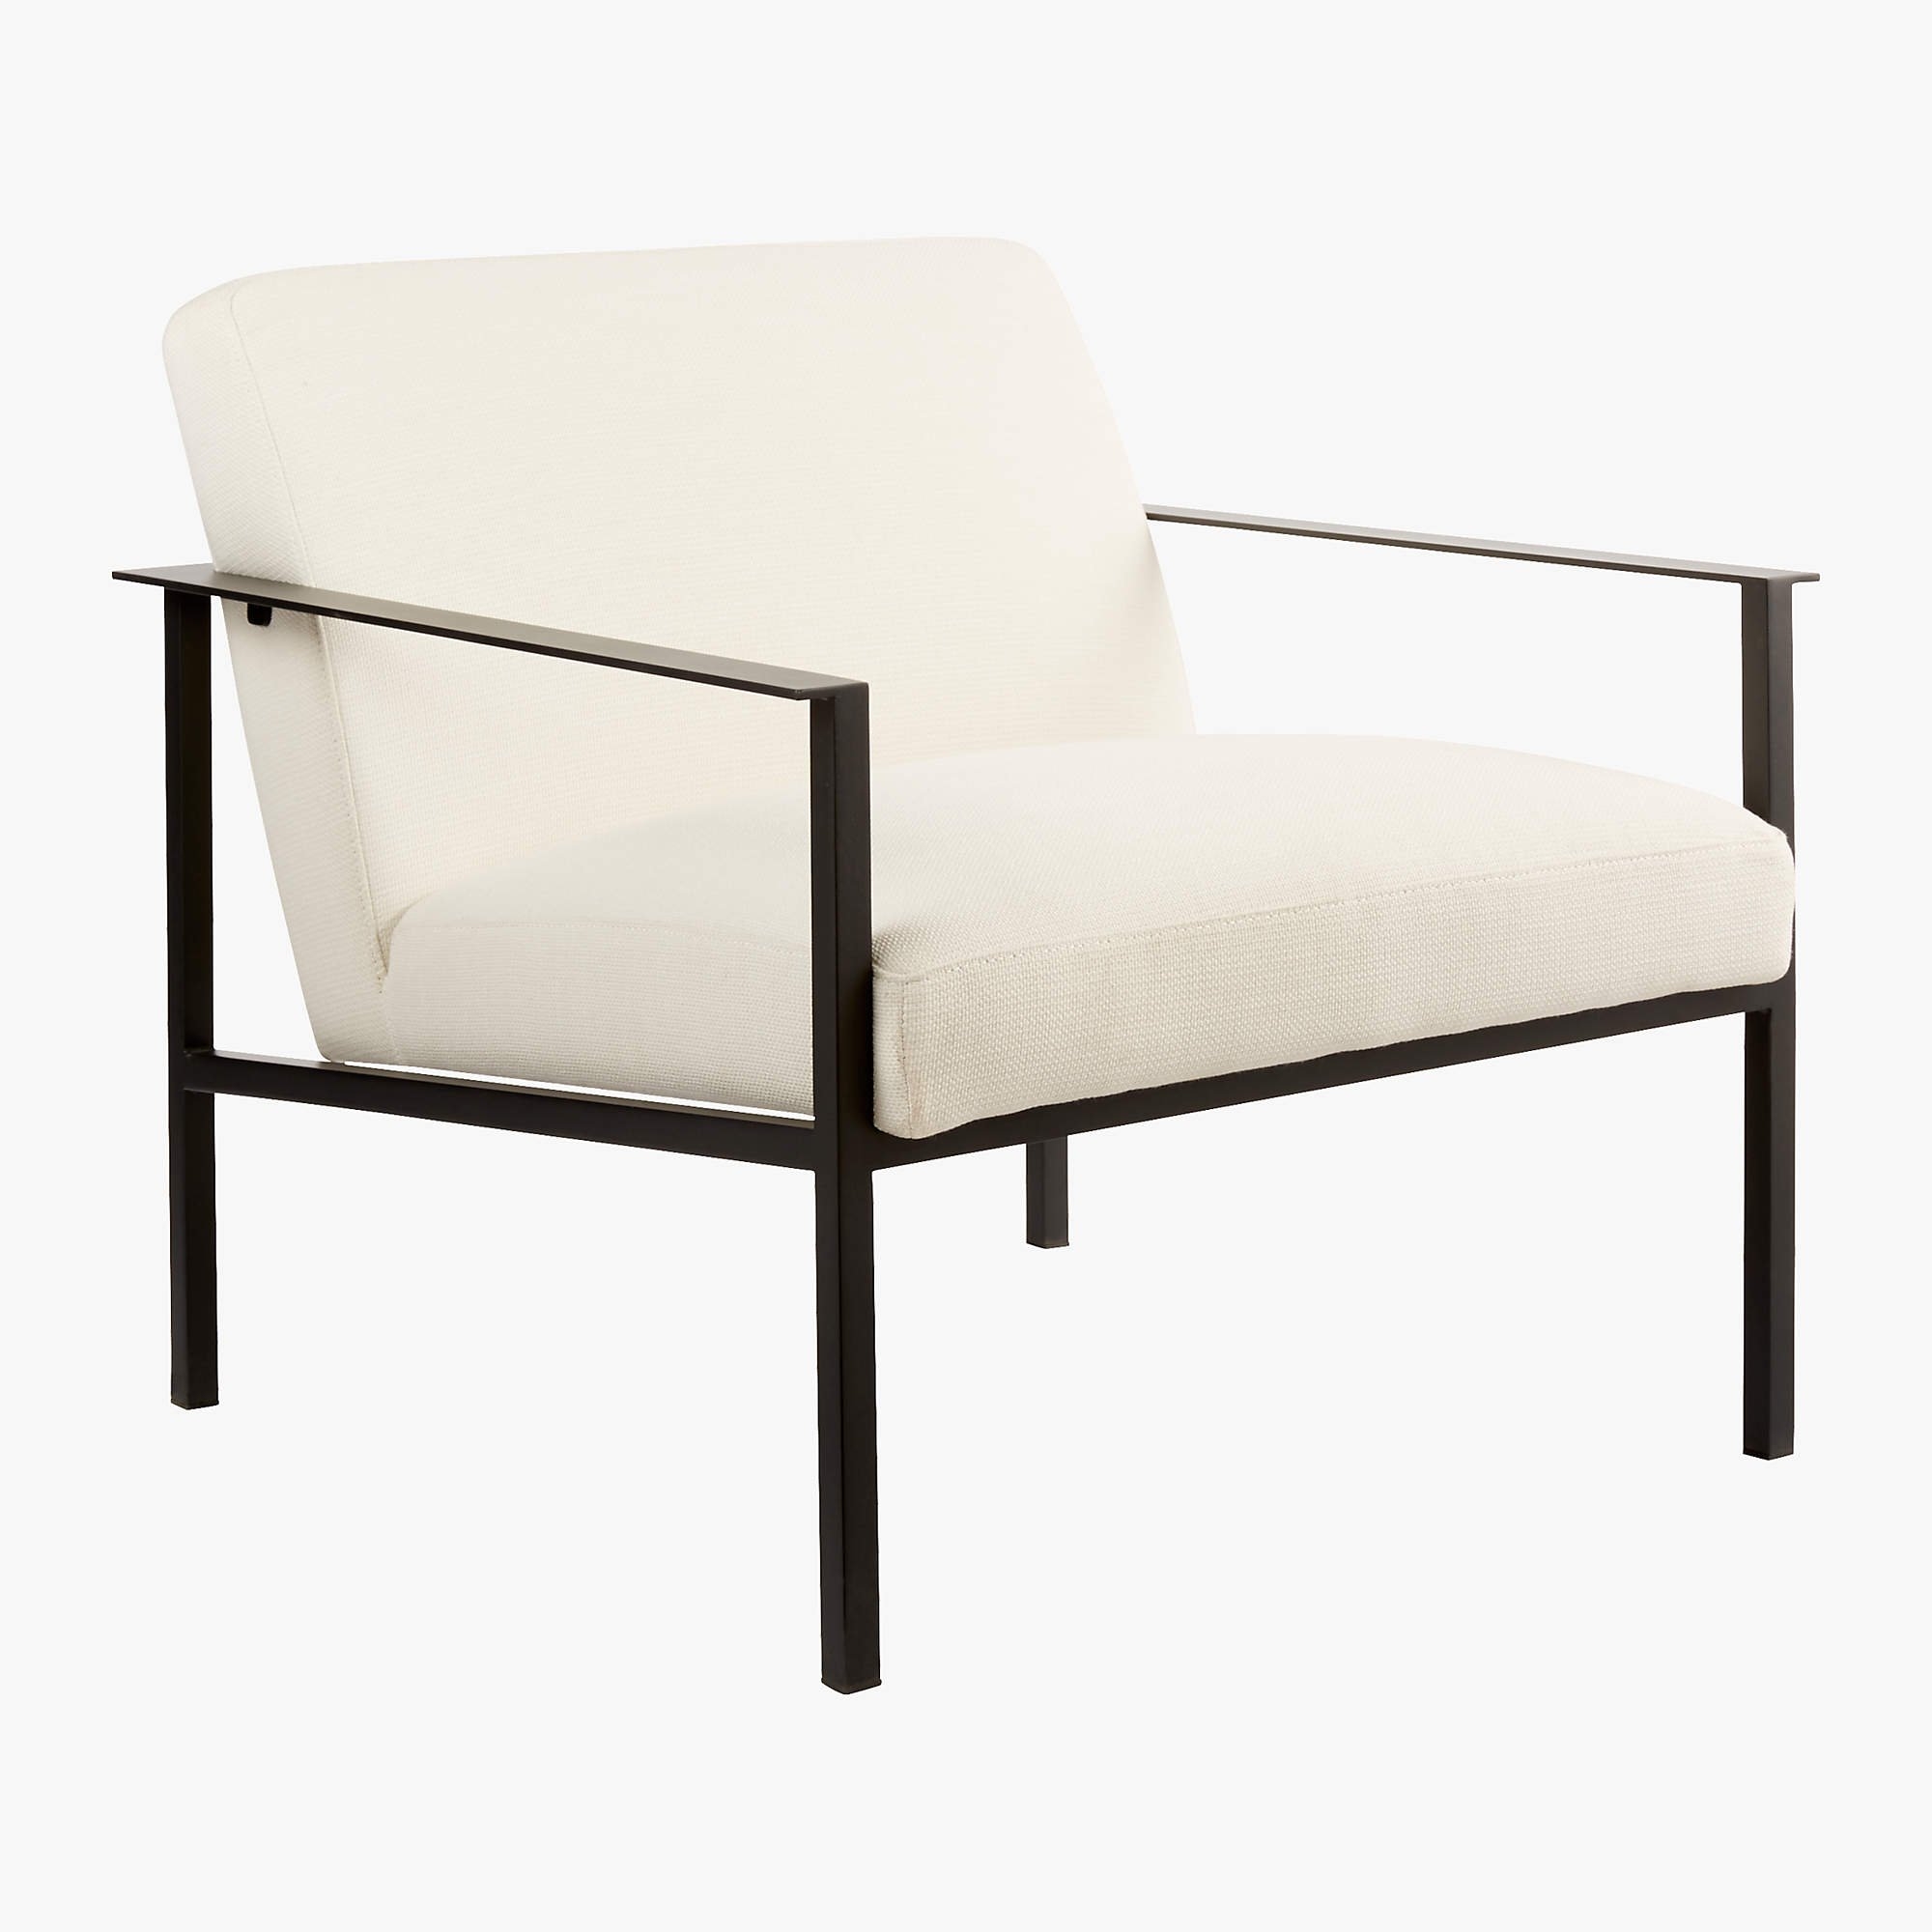 Cue White Chair with Black Legs - Image 0